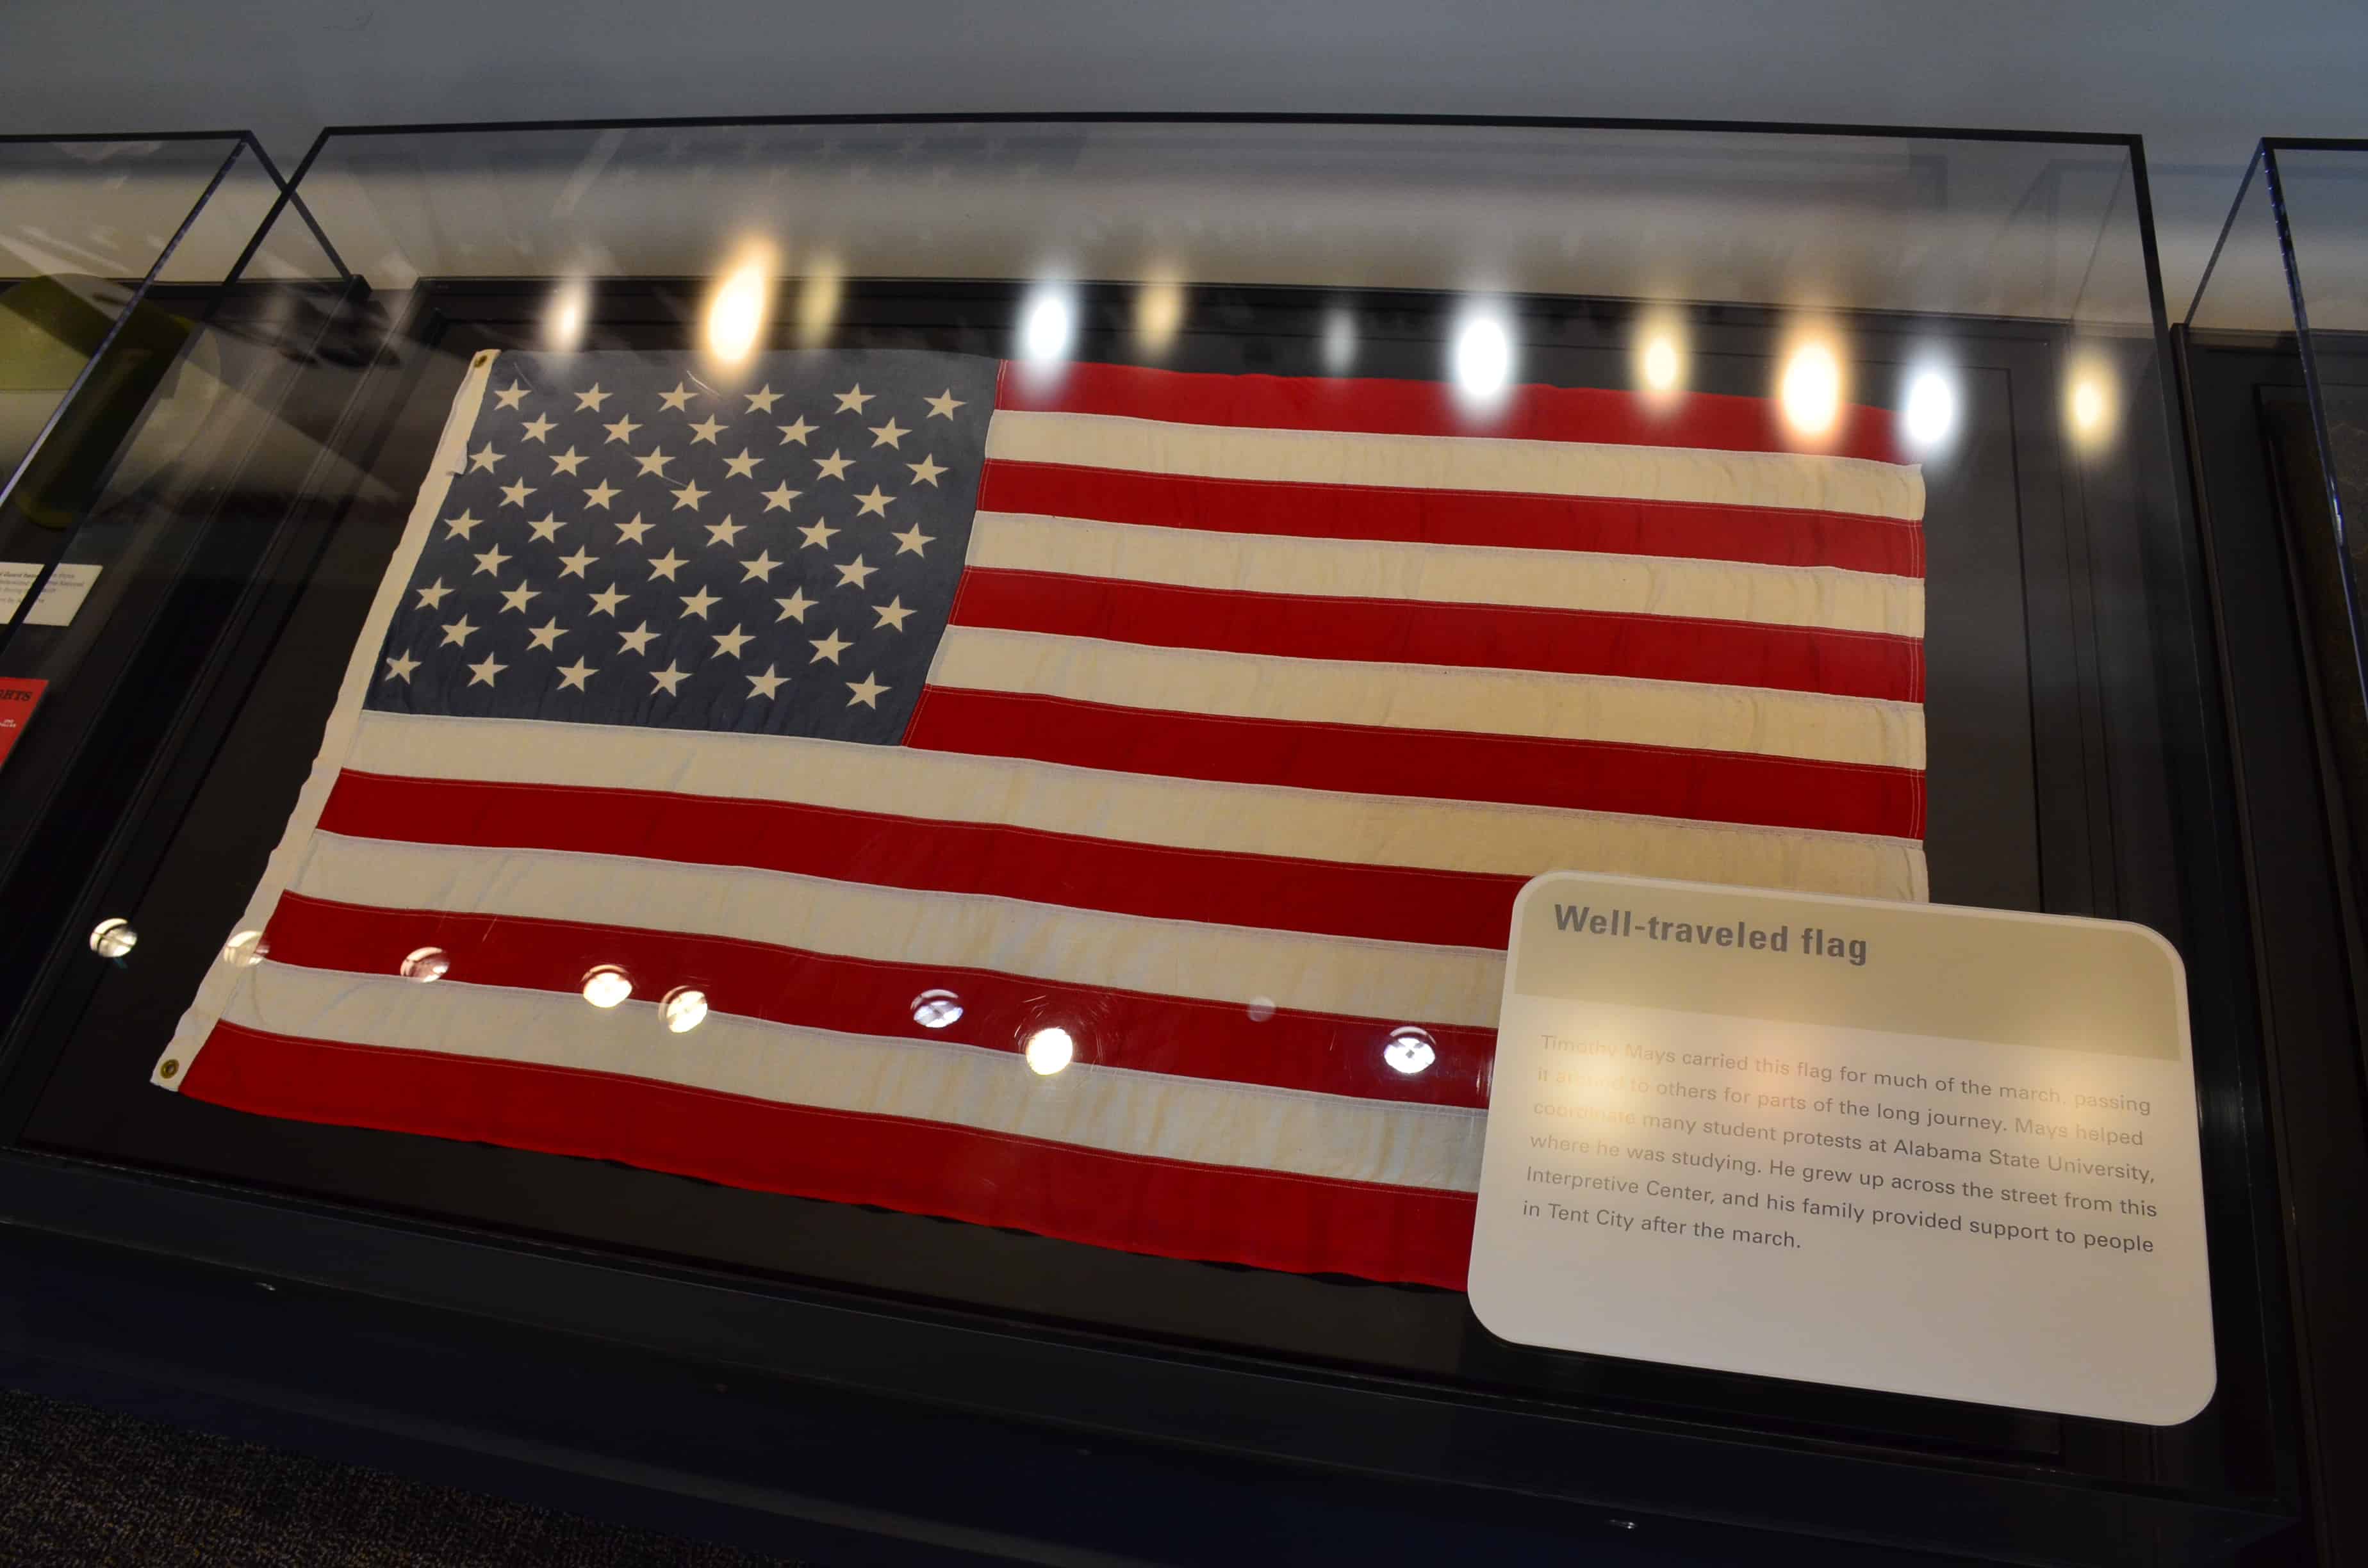 A flag carried during the march at the Lowndes Interpretive Center on the Selma to Montgomery National Historic Trail in Alabama